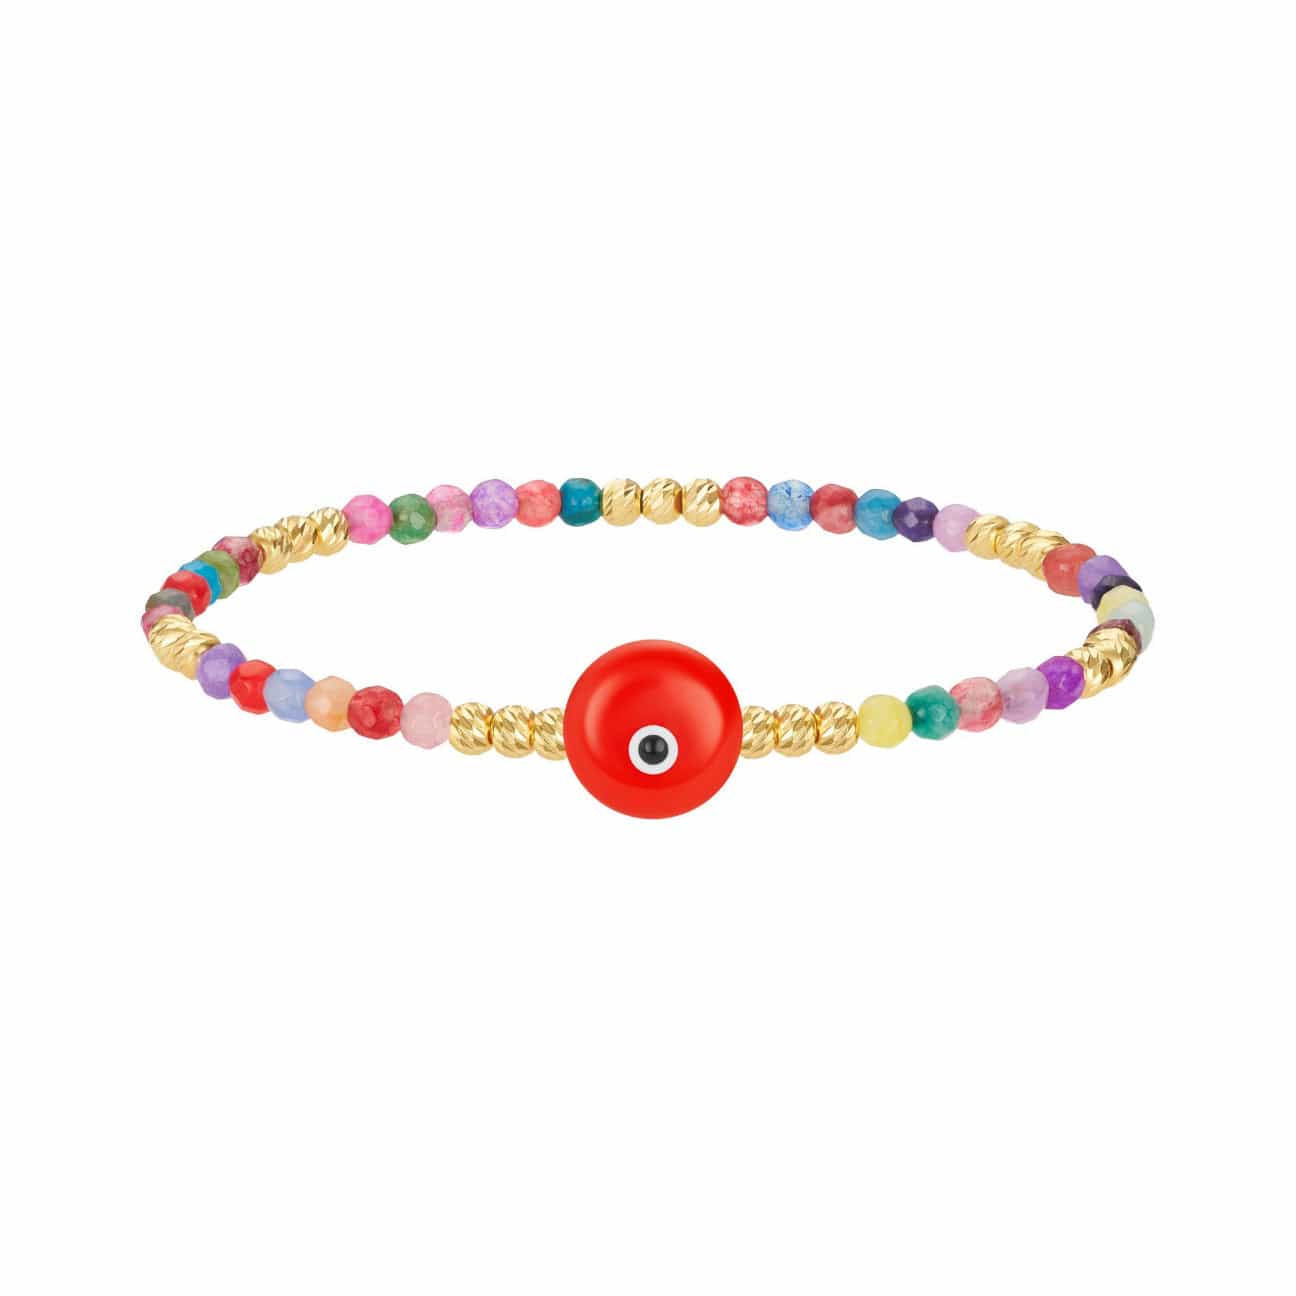 Colored Bead Bracelet with Majestic Evil Eye - Coral - Golden Tangerine